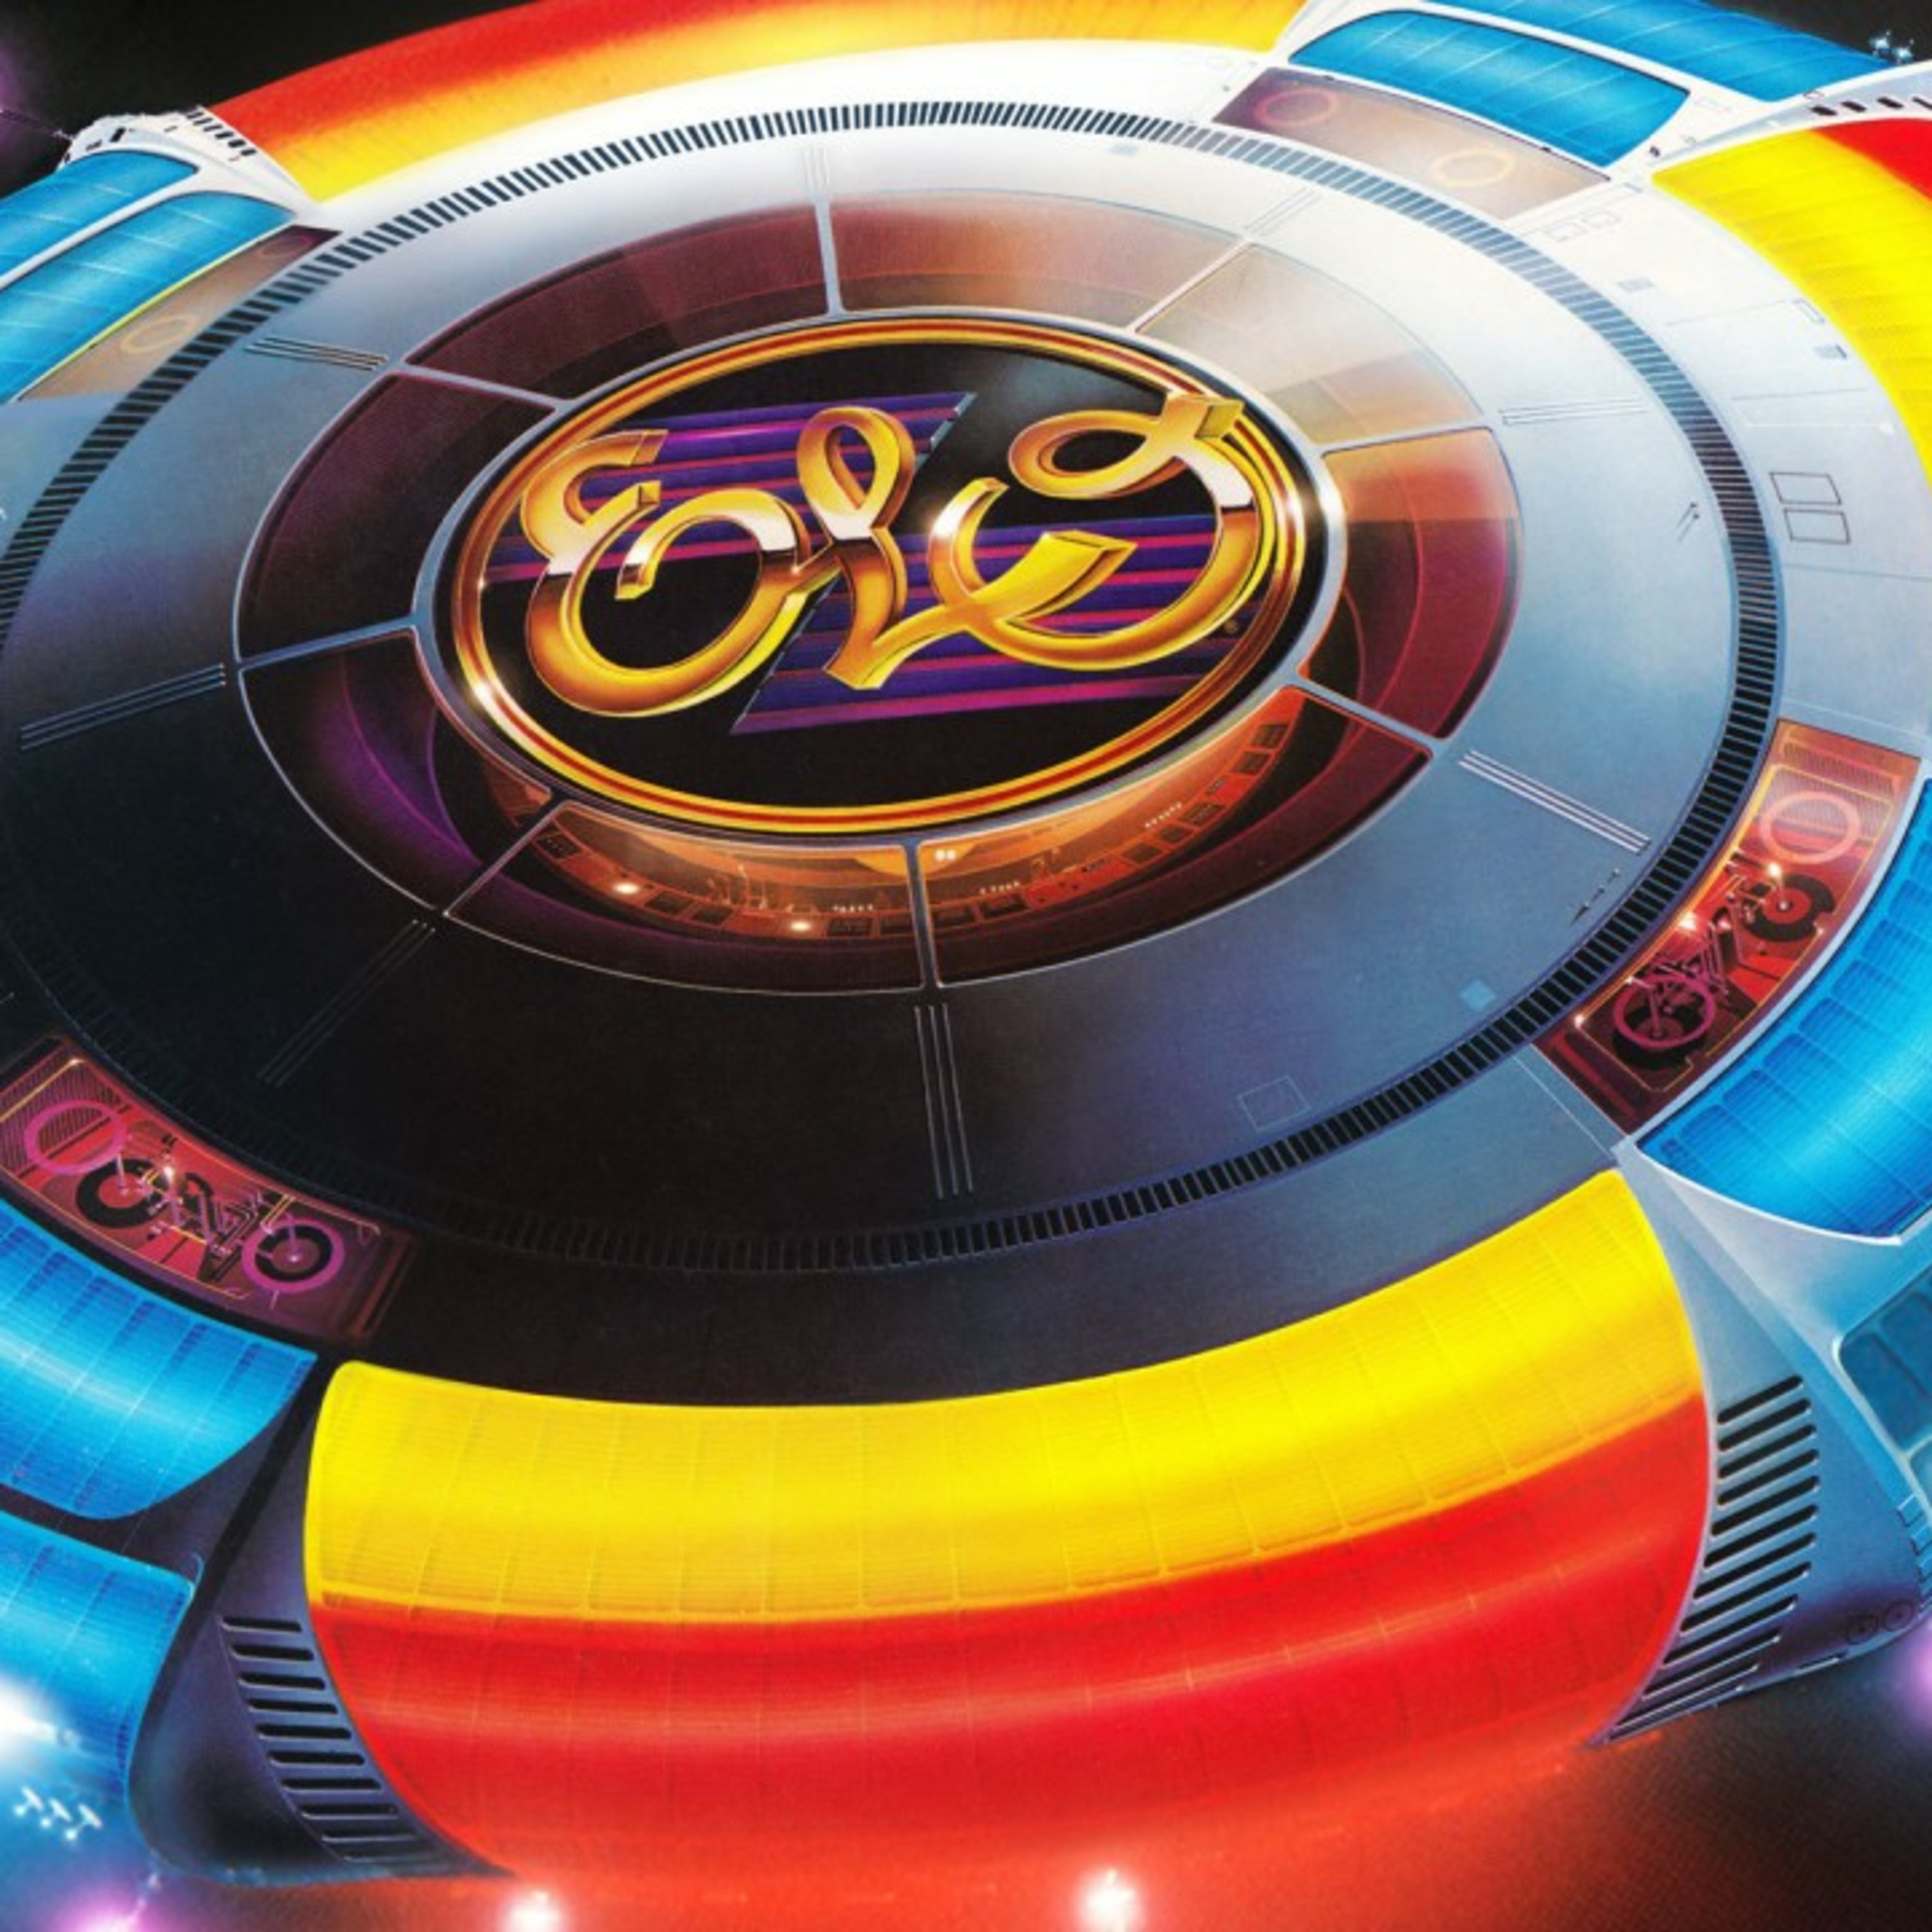 Elo electric light orchestra. Electric Light Orchestra. The Electric Light Orchestra Electric Light Orchestra. Jeff Lynne's Elo. Electric Light Orchestra 1977.